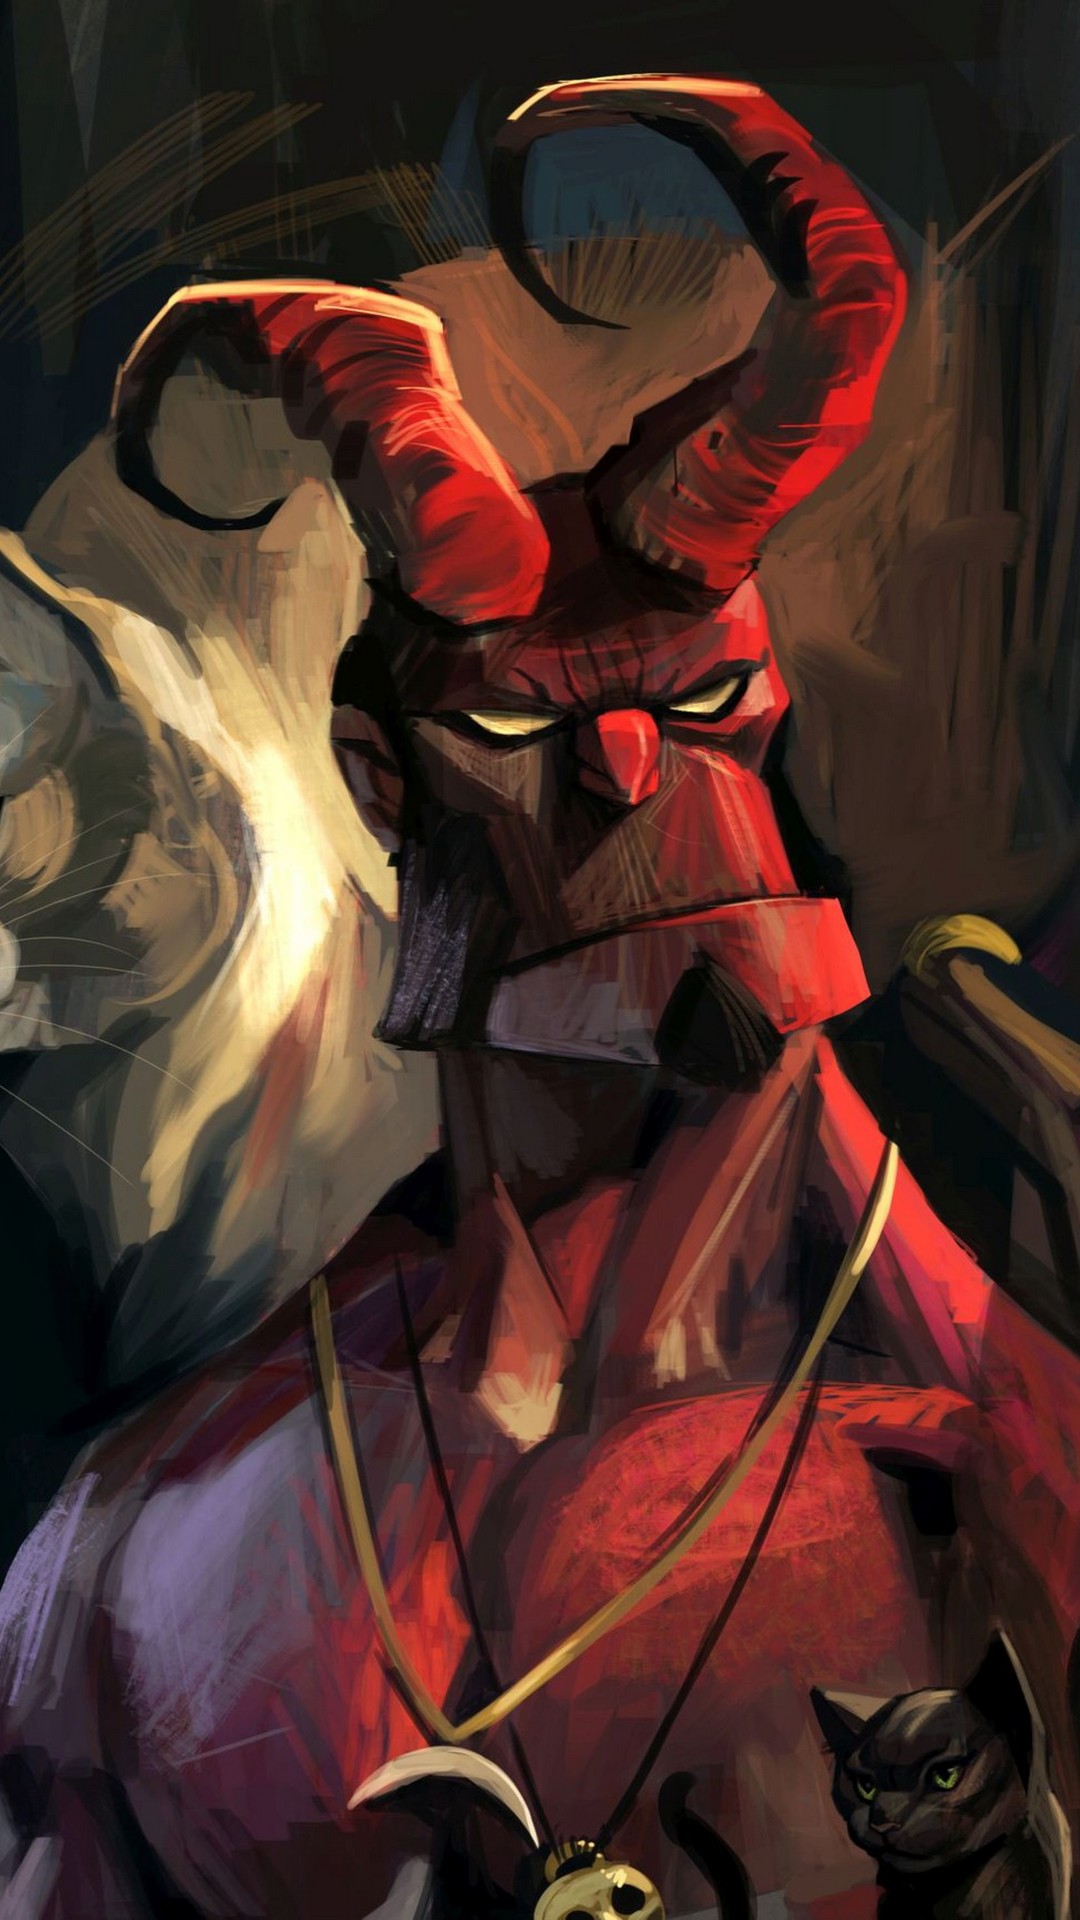 Hellboy Wallpaper For iPhone with high-resolution 1080x1920 pixel. You can use this wallpaper for your Desktop Computer Backgrounds, Mac Wallpapers, Android Lock screen or iPhone Screensavers and another smartphone device